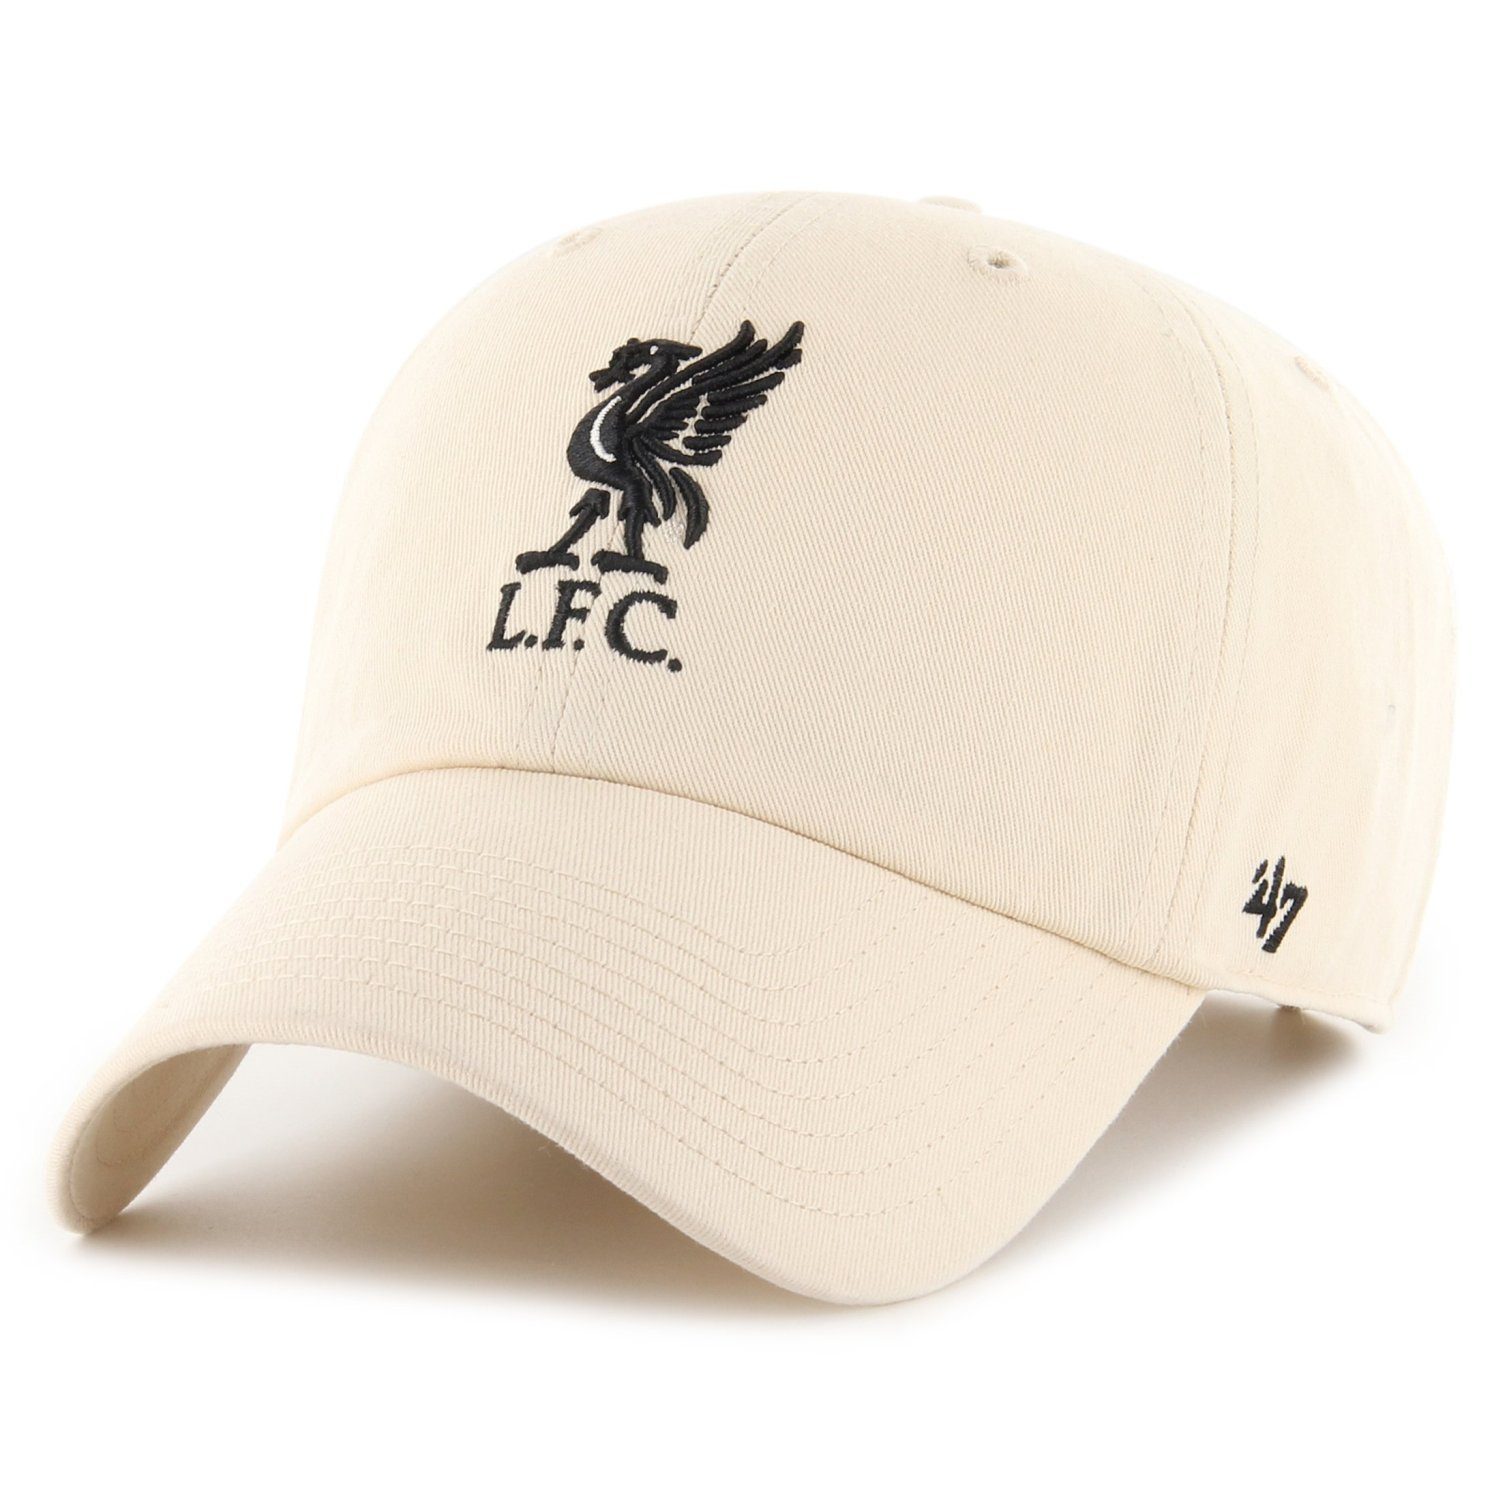 '47 Brand Trucker Cap Relaxed Fit FC Liverpool